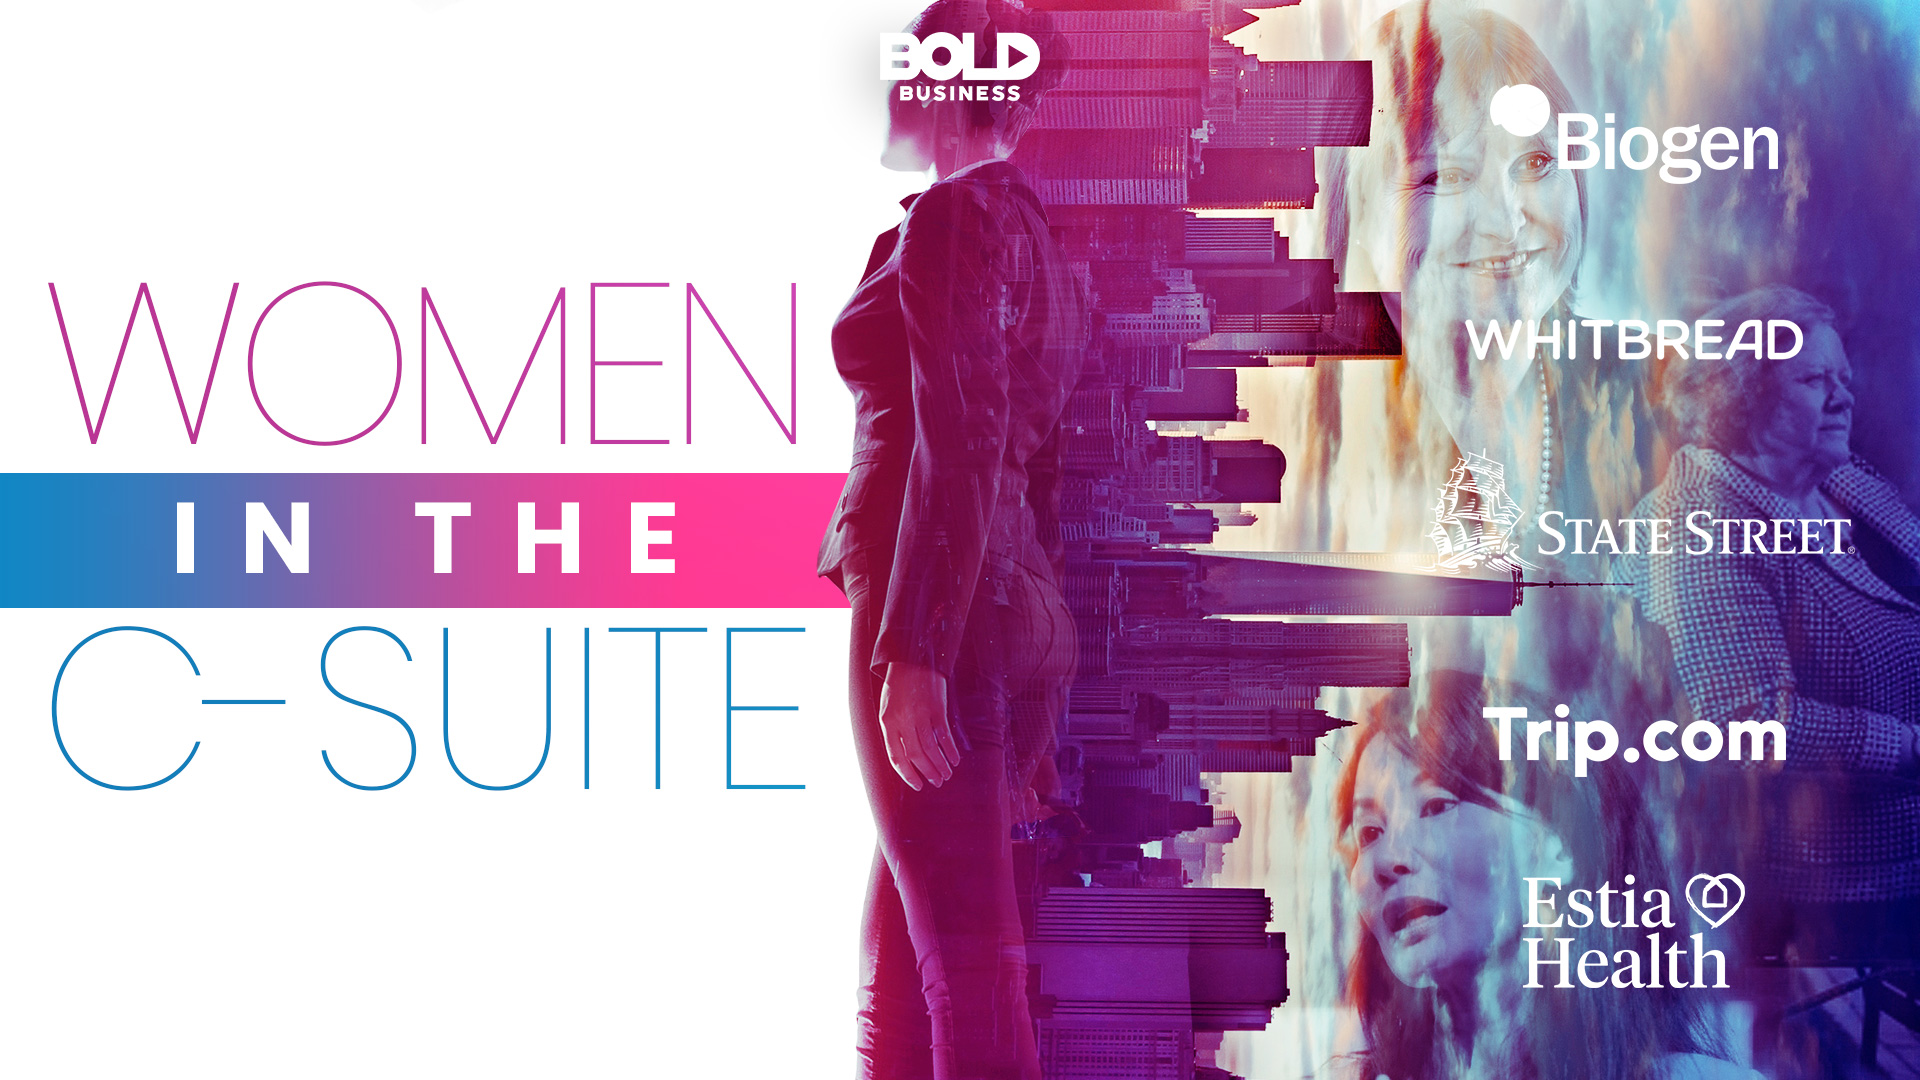 Importance of Women in the C-Suite